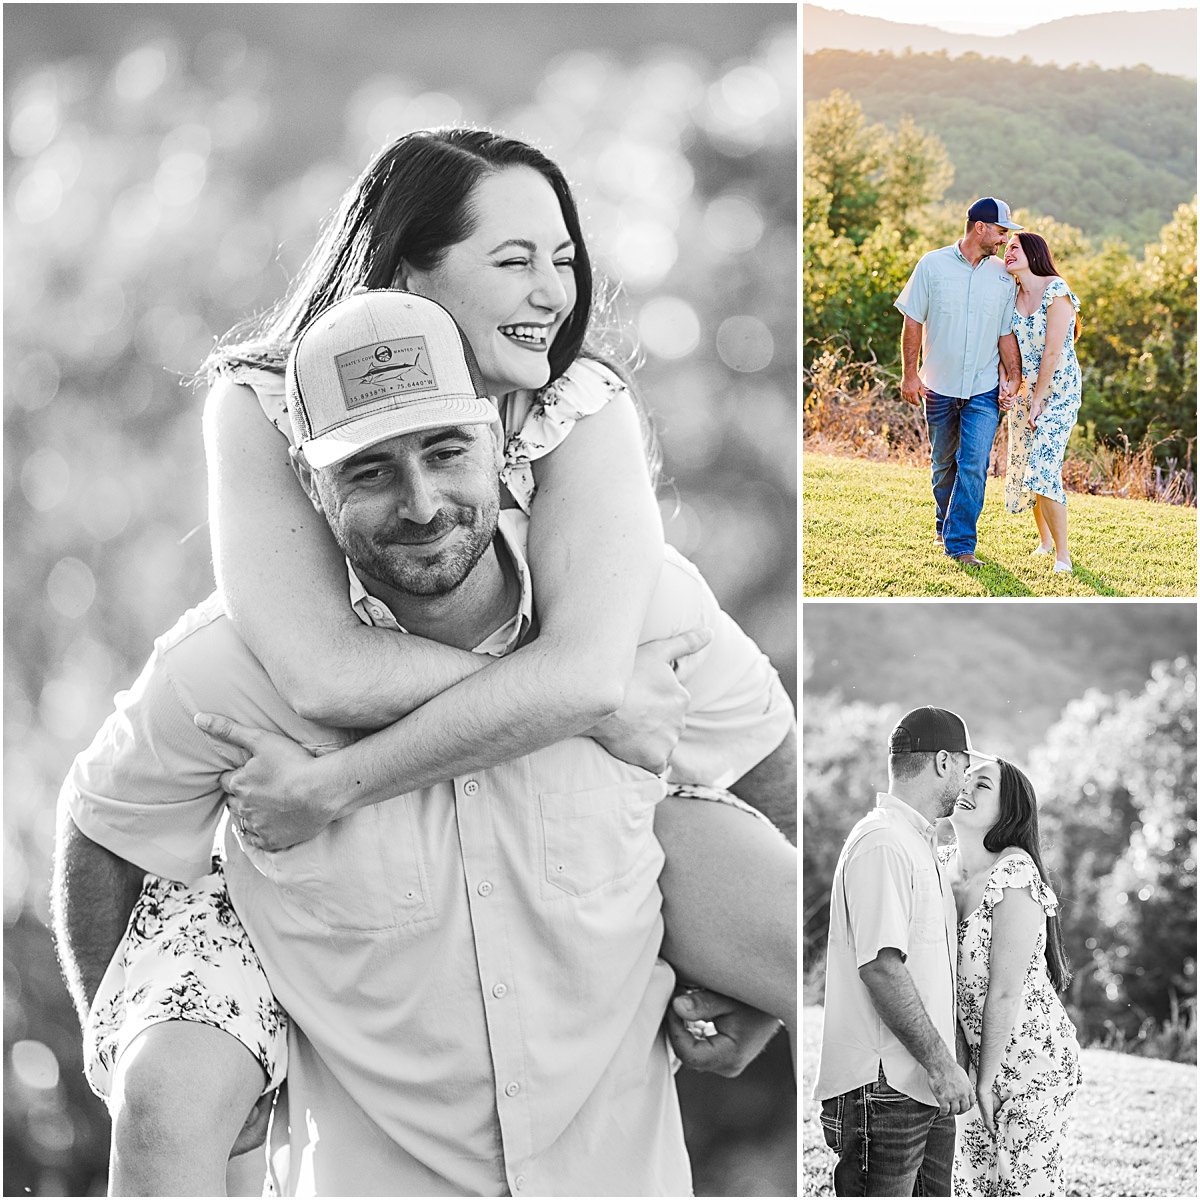 Mary and Daniel side by side and close to each other during their engagement session